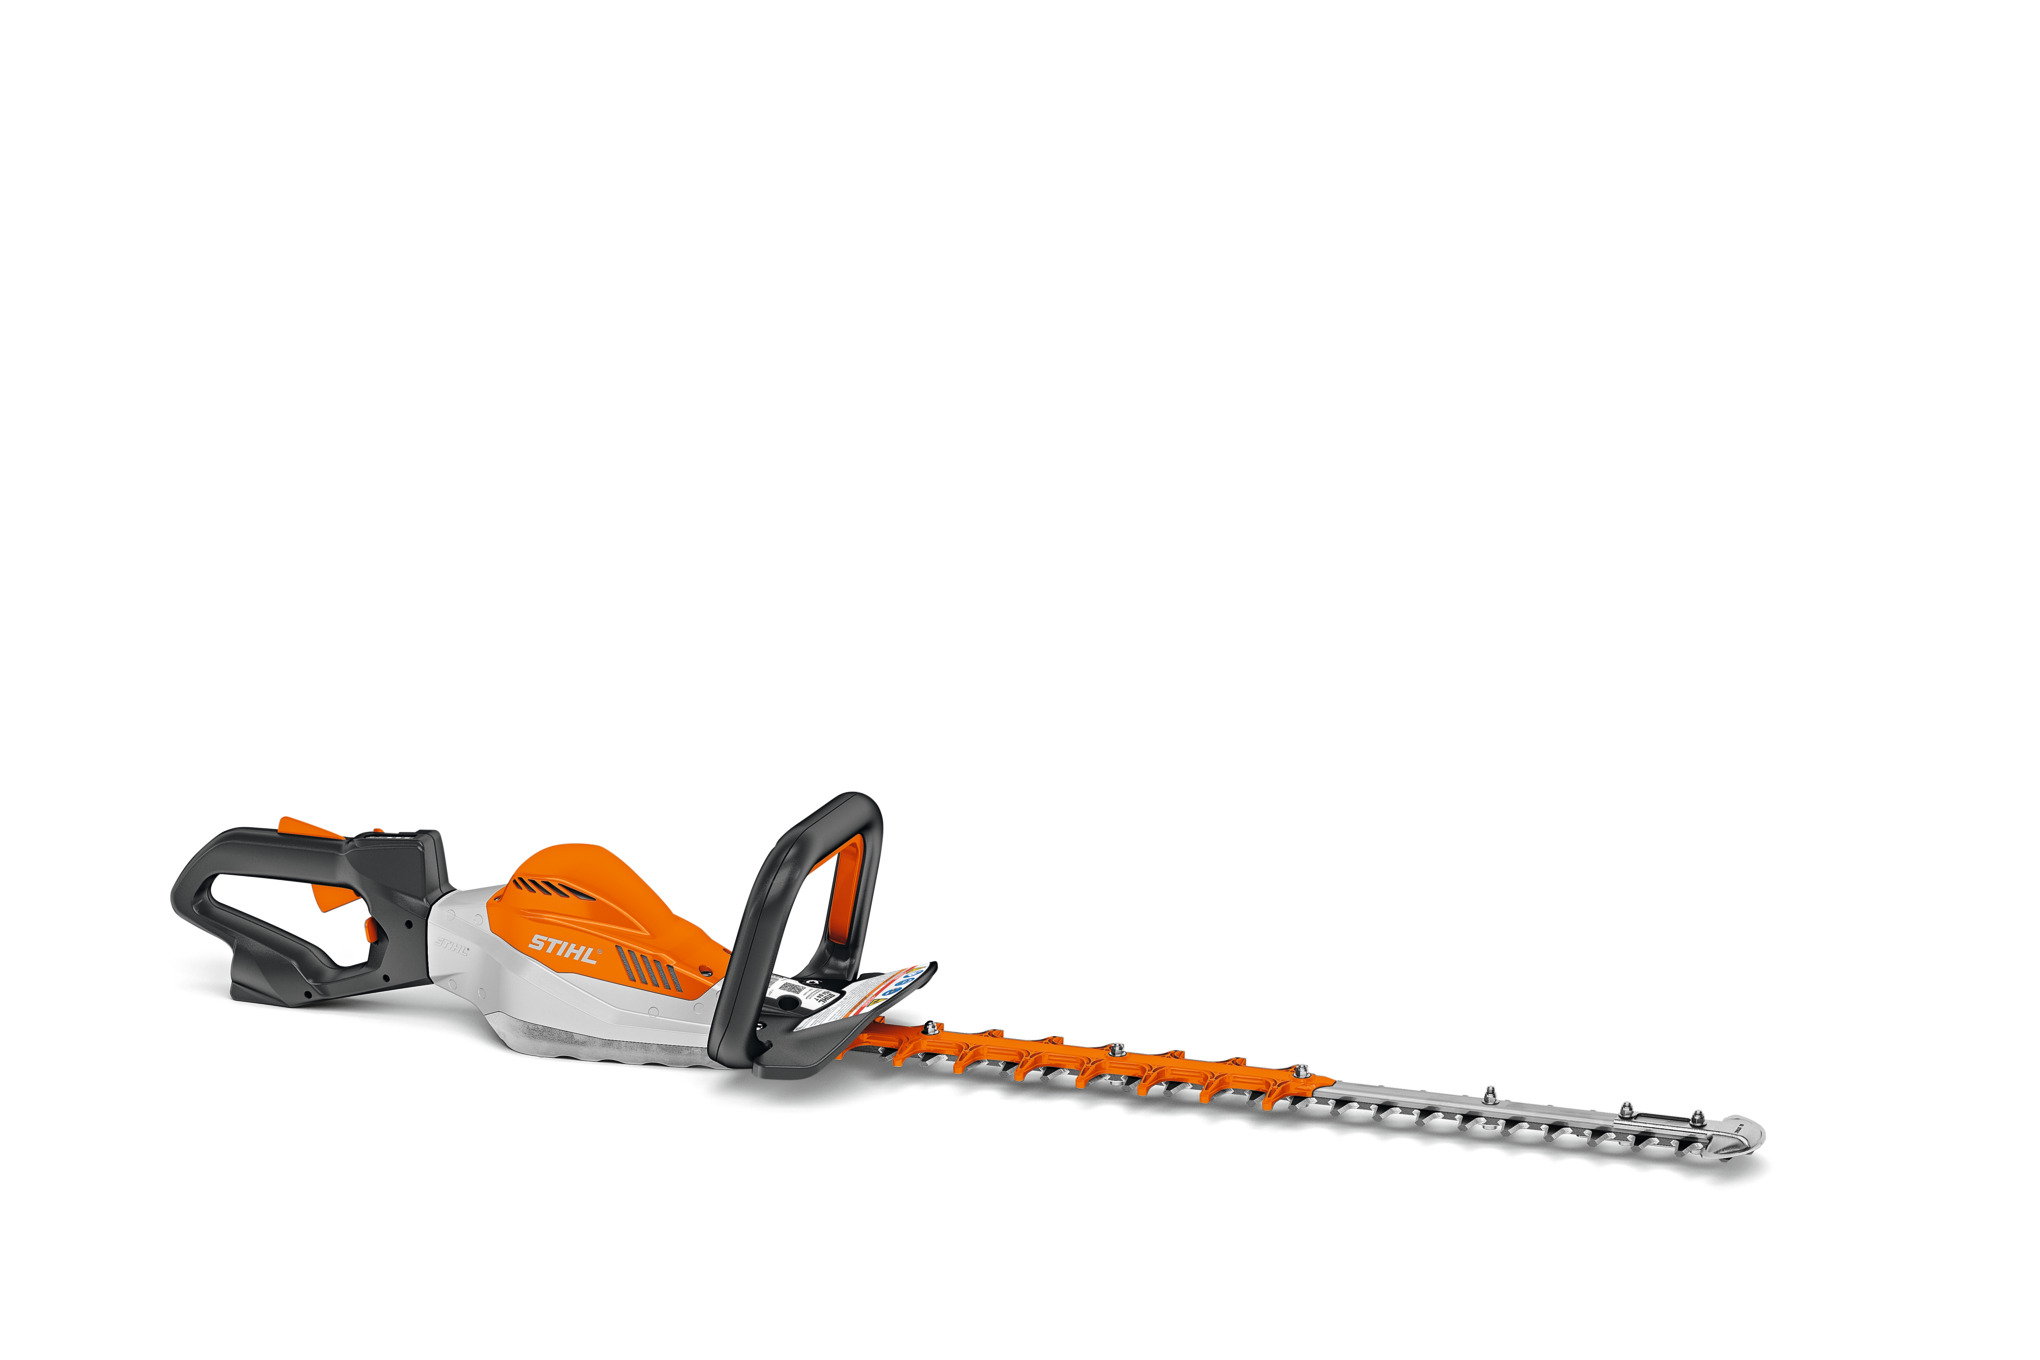 STIHL HSA 94 cordless hedge trimmer from the AP-System